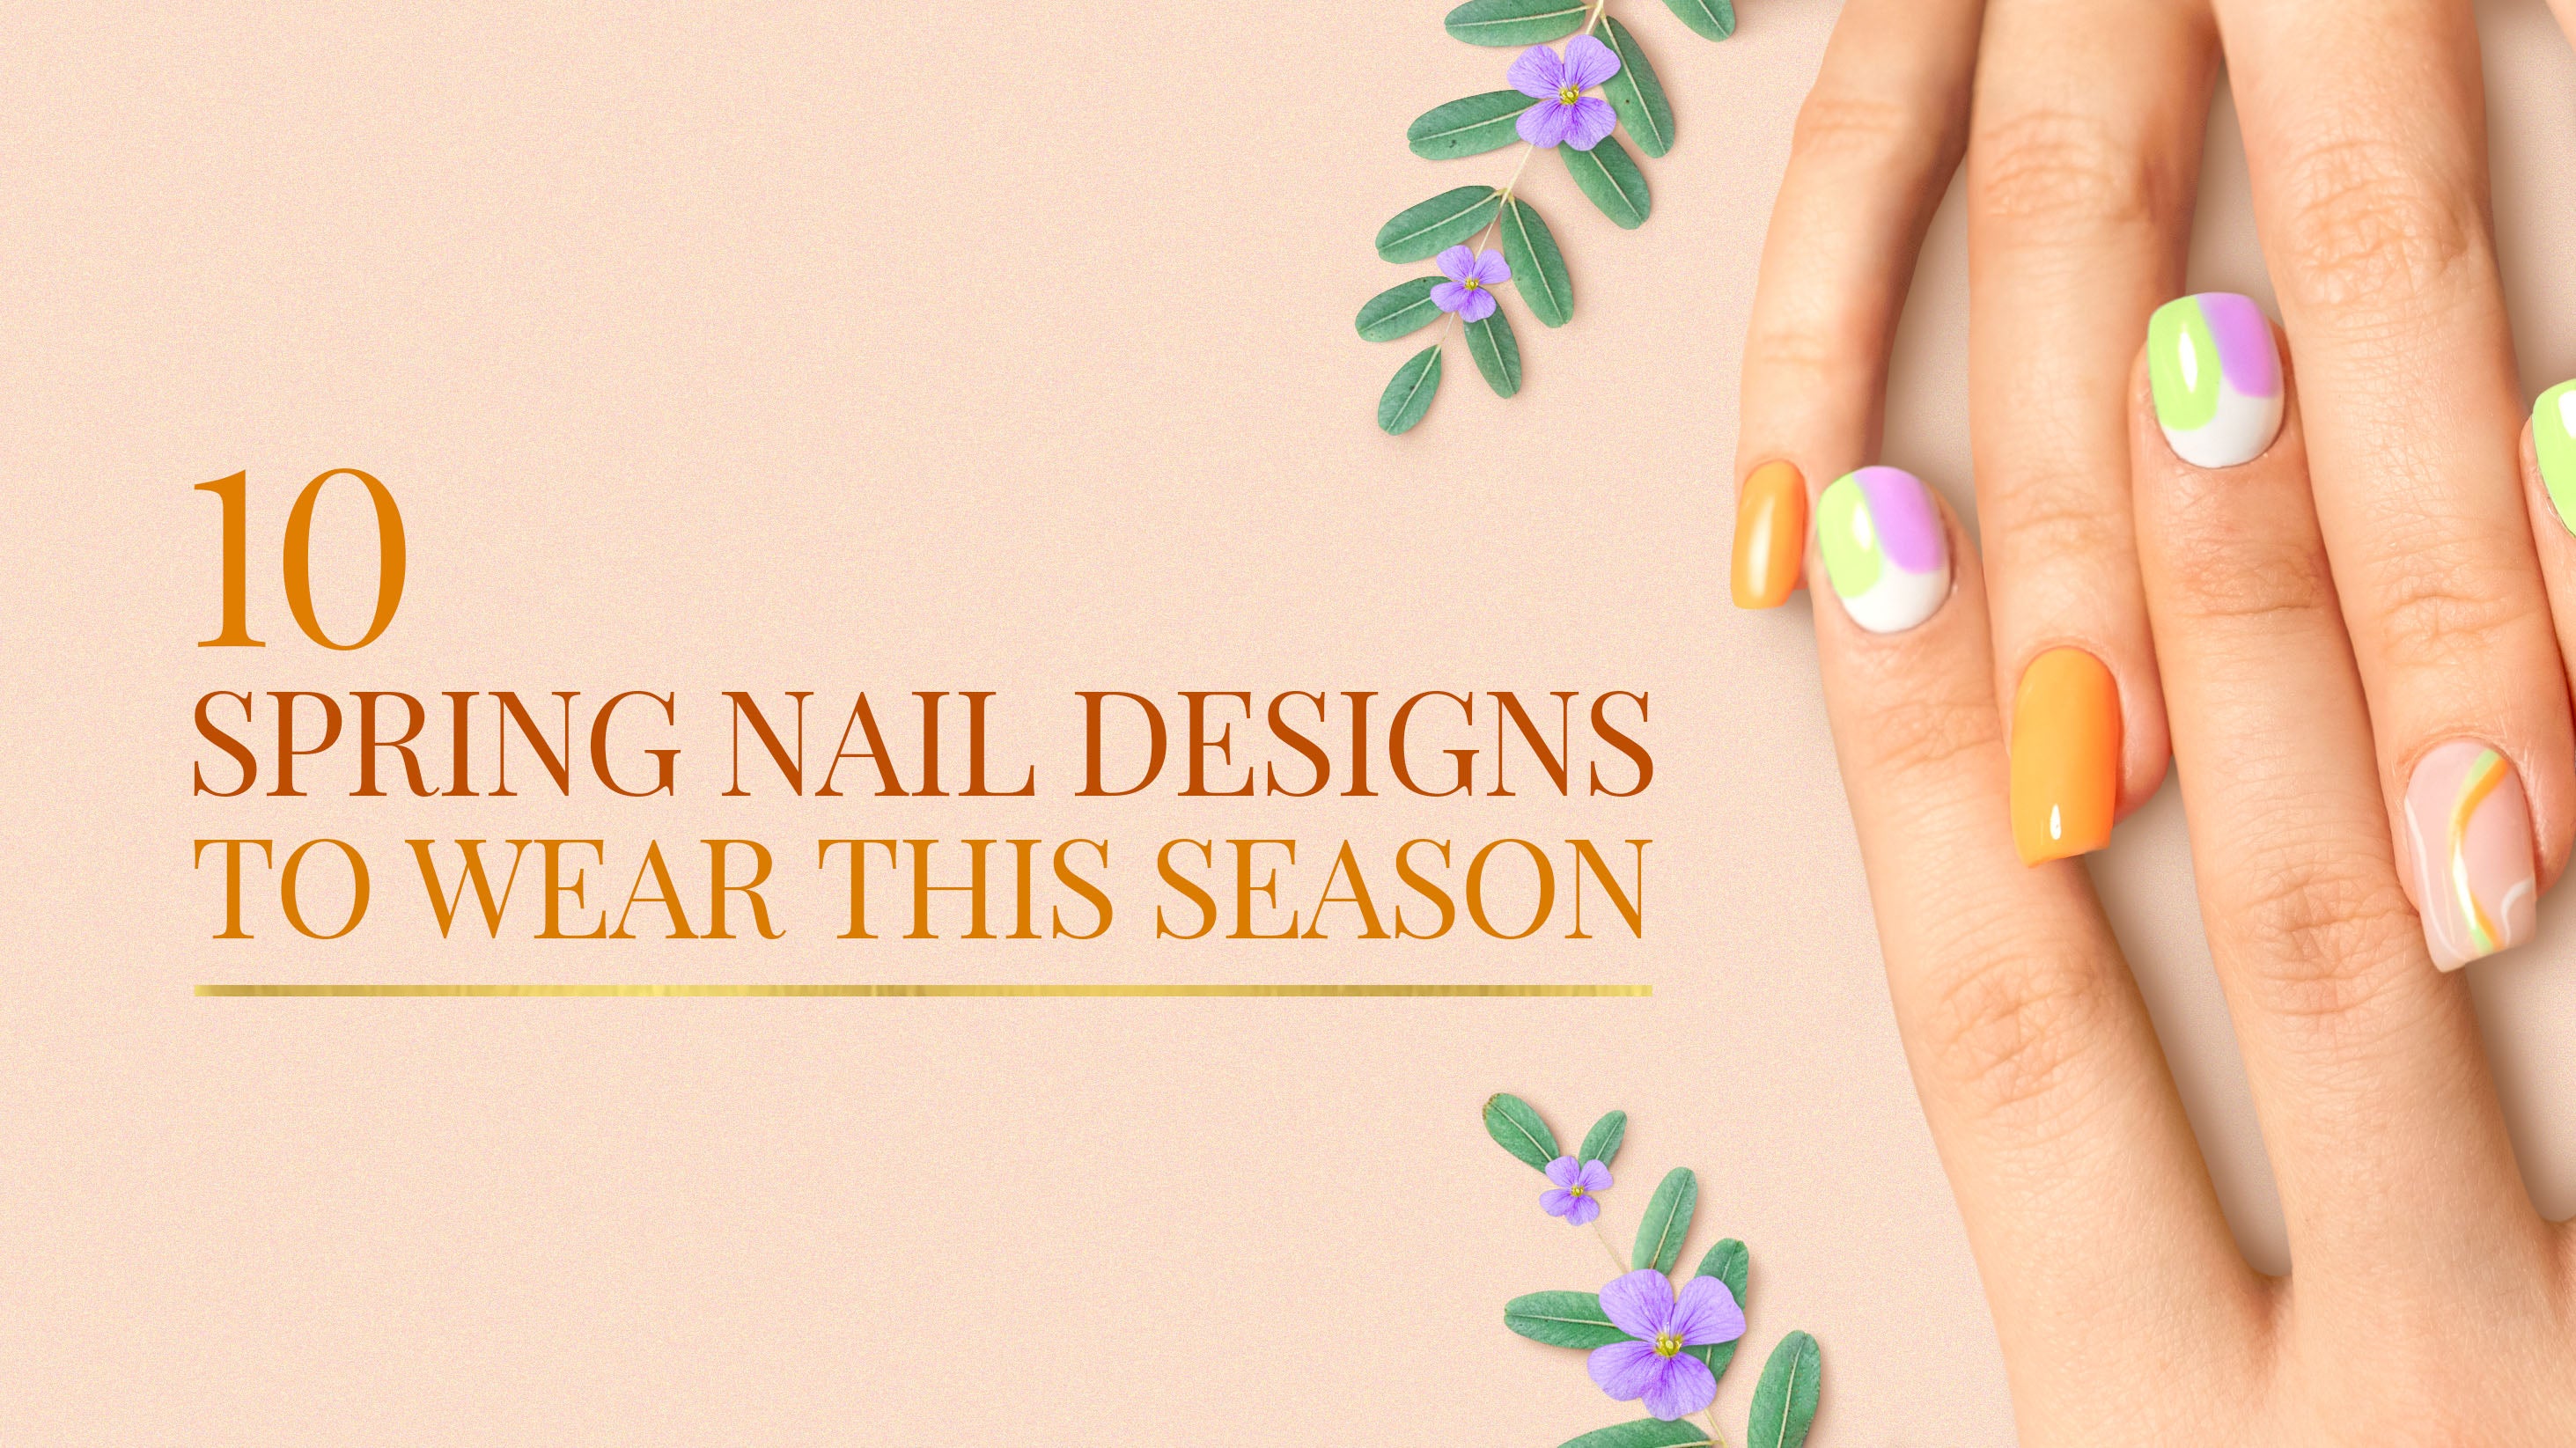 8. 25 Spring Nail Designs That Will Make You Want to Get a Manicure ASAP - wide 4